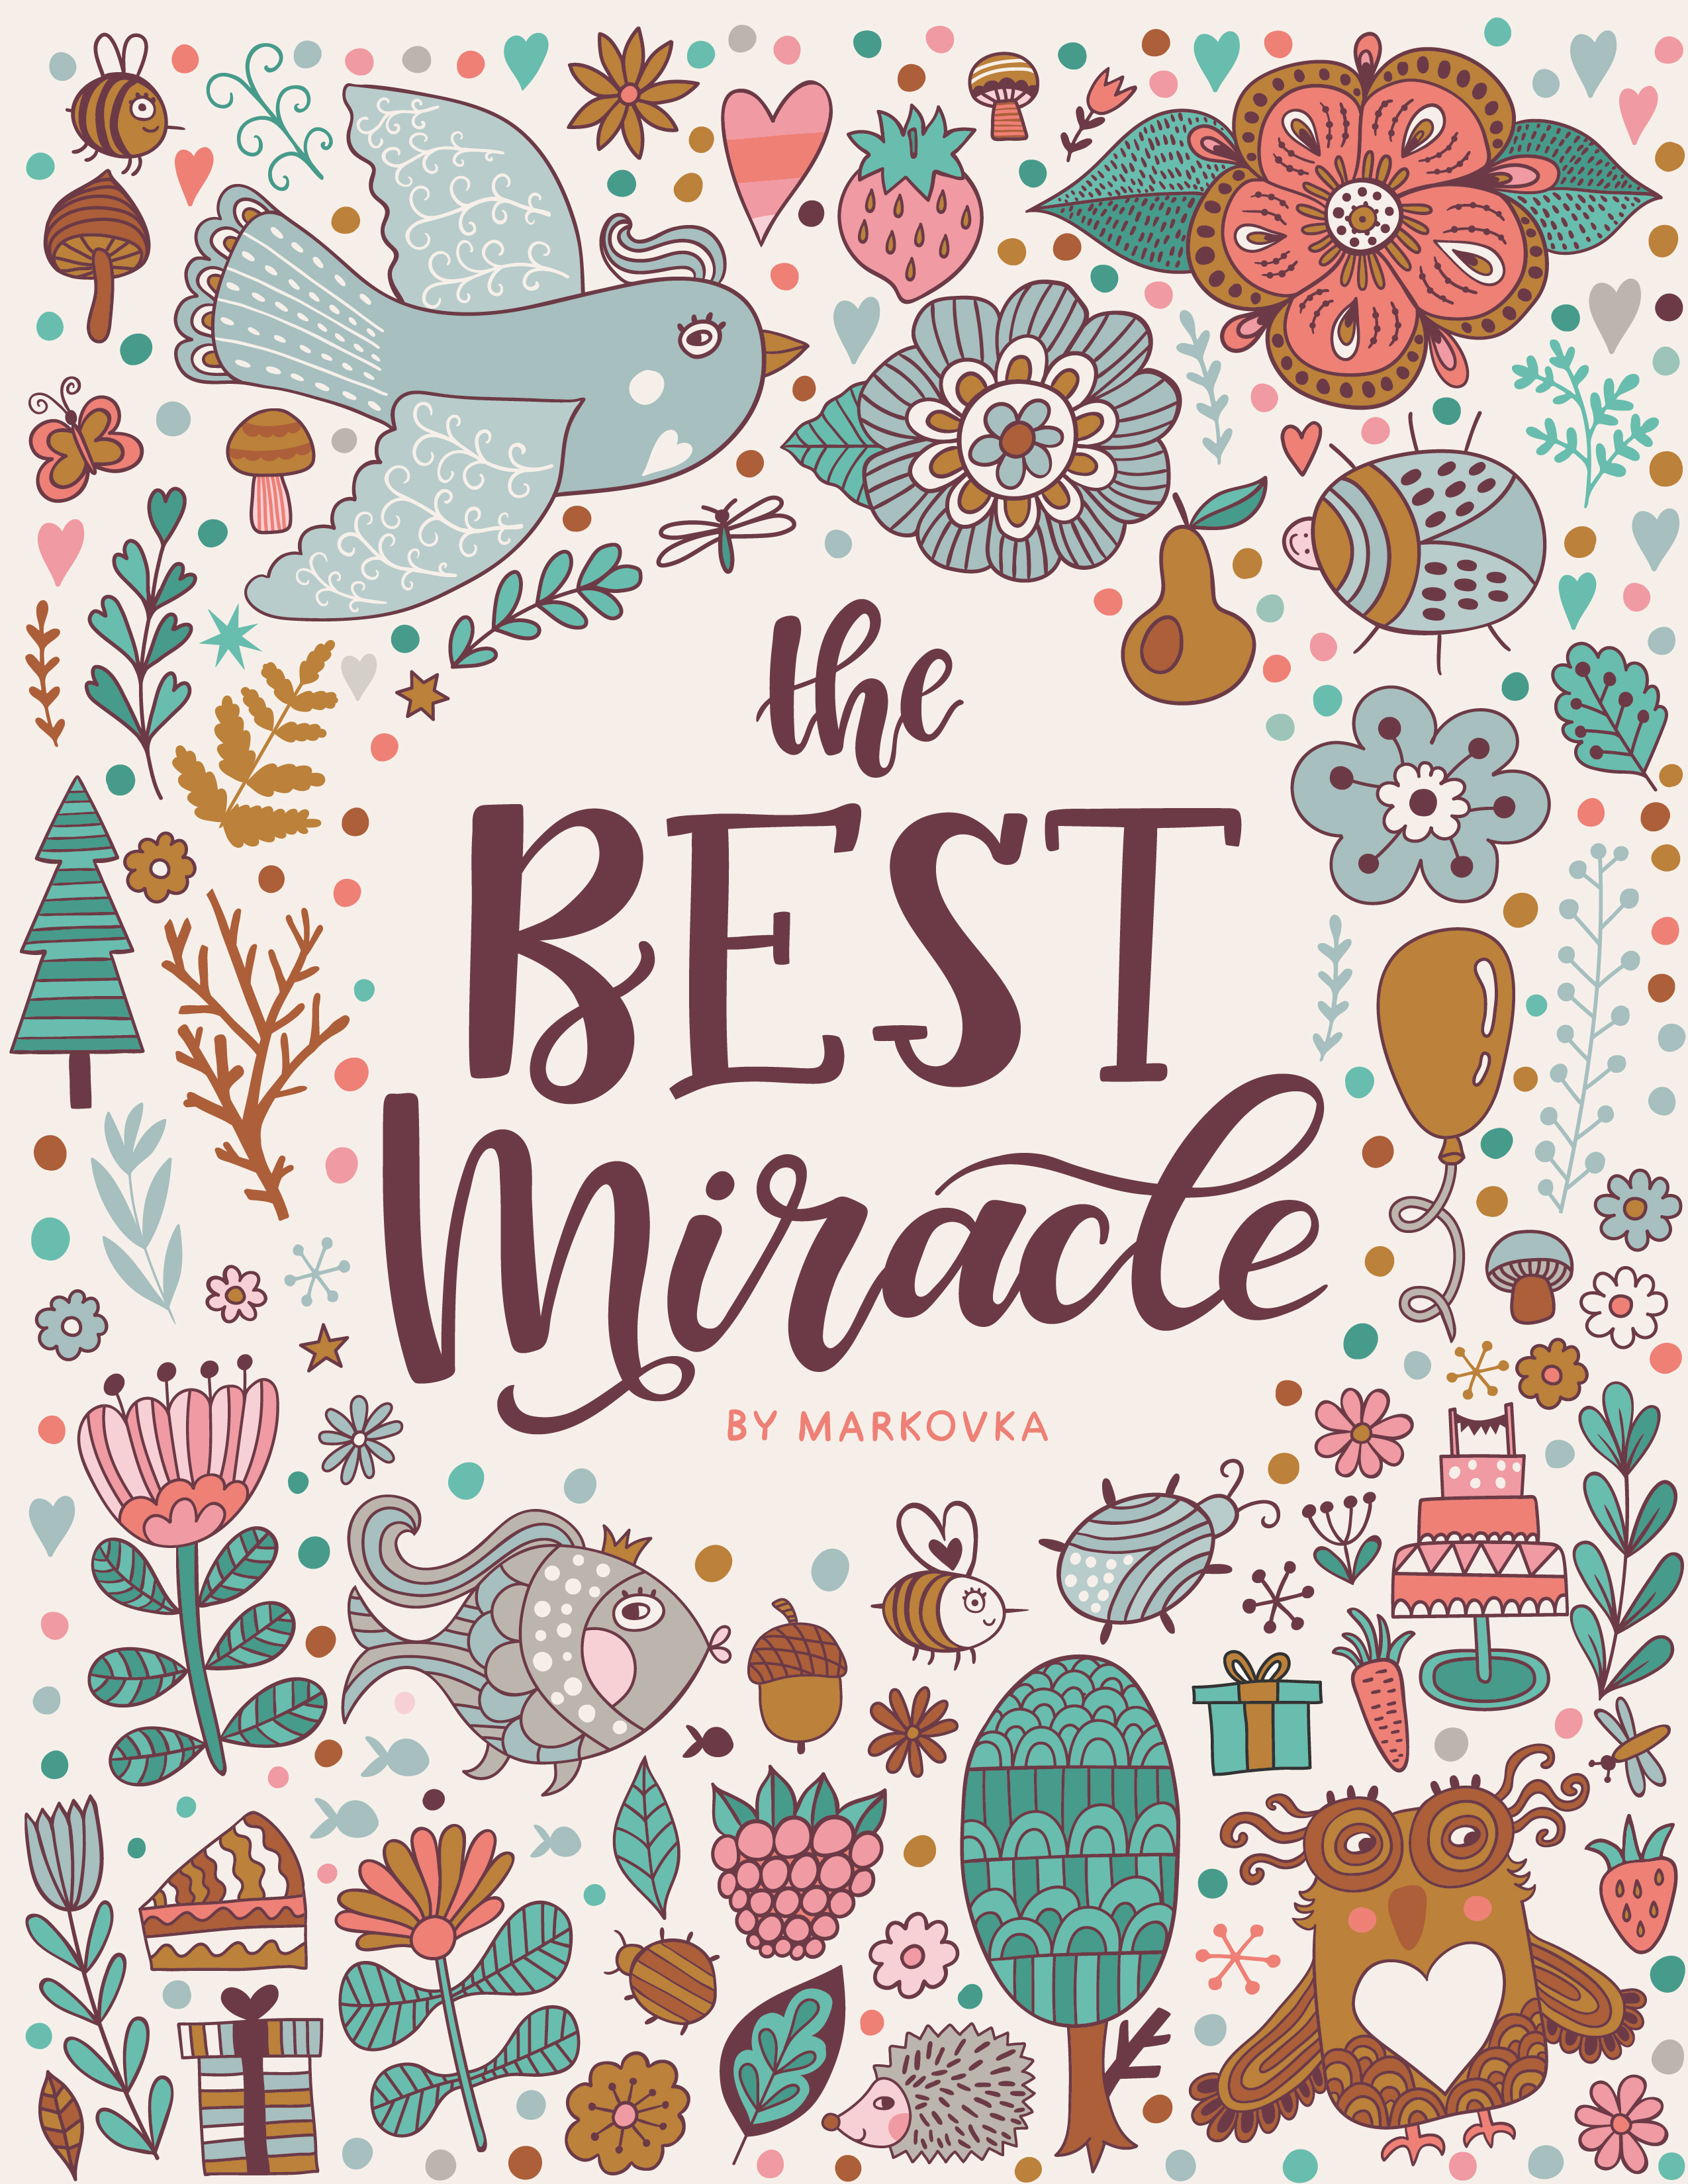 FREE: The Best Miracle: Show Your Children The Miracles Of The World The Fun Way by Markovka